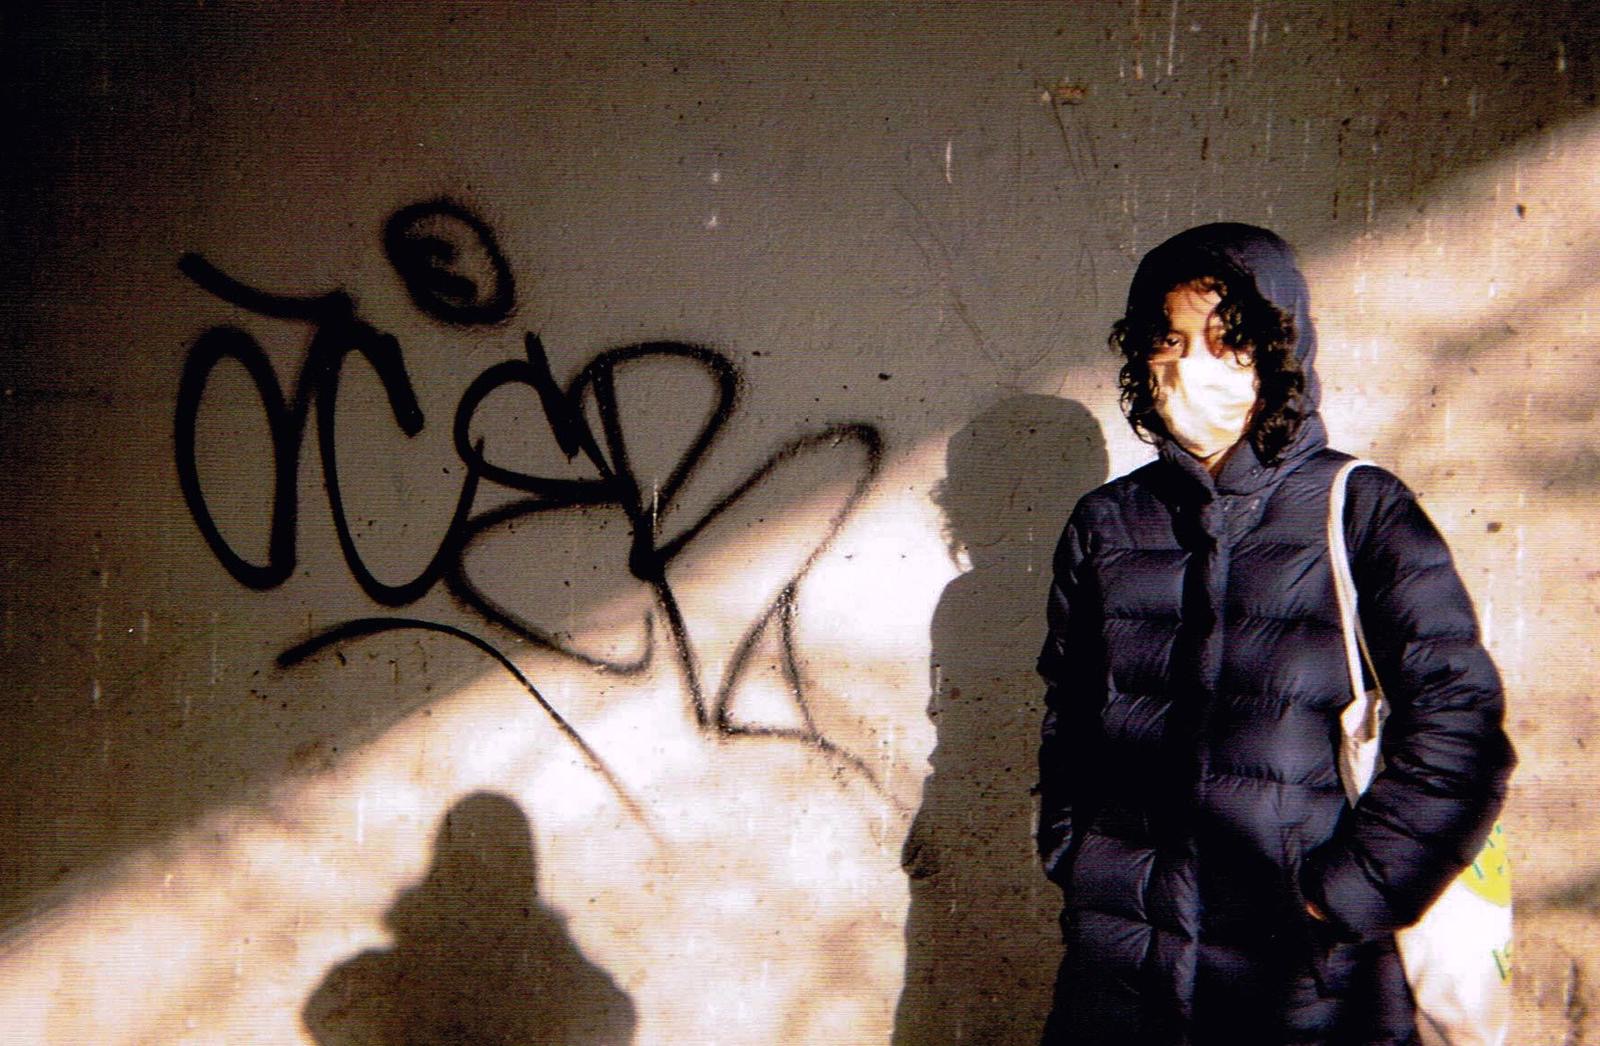 A photograph of a masked person in front of a graffitied cement wall. The photographer's shadow appears to the person's left.